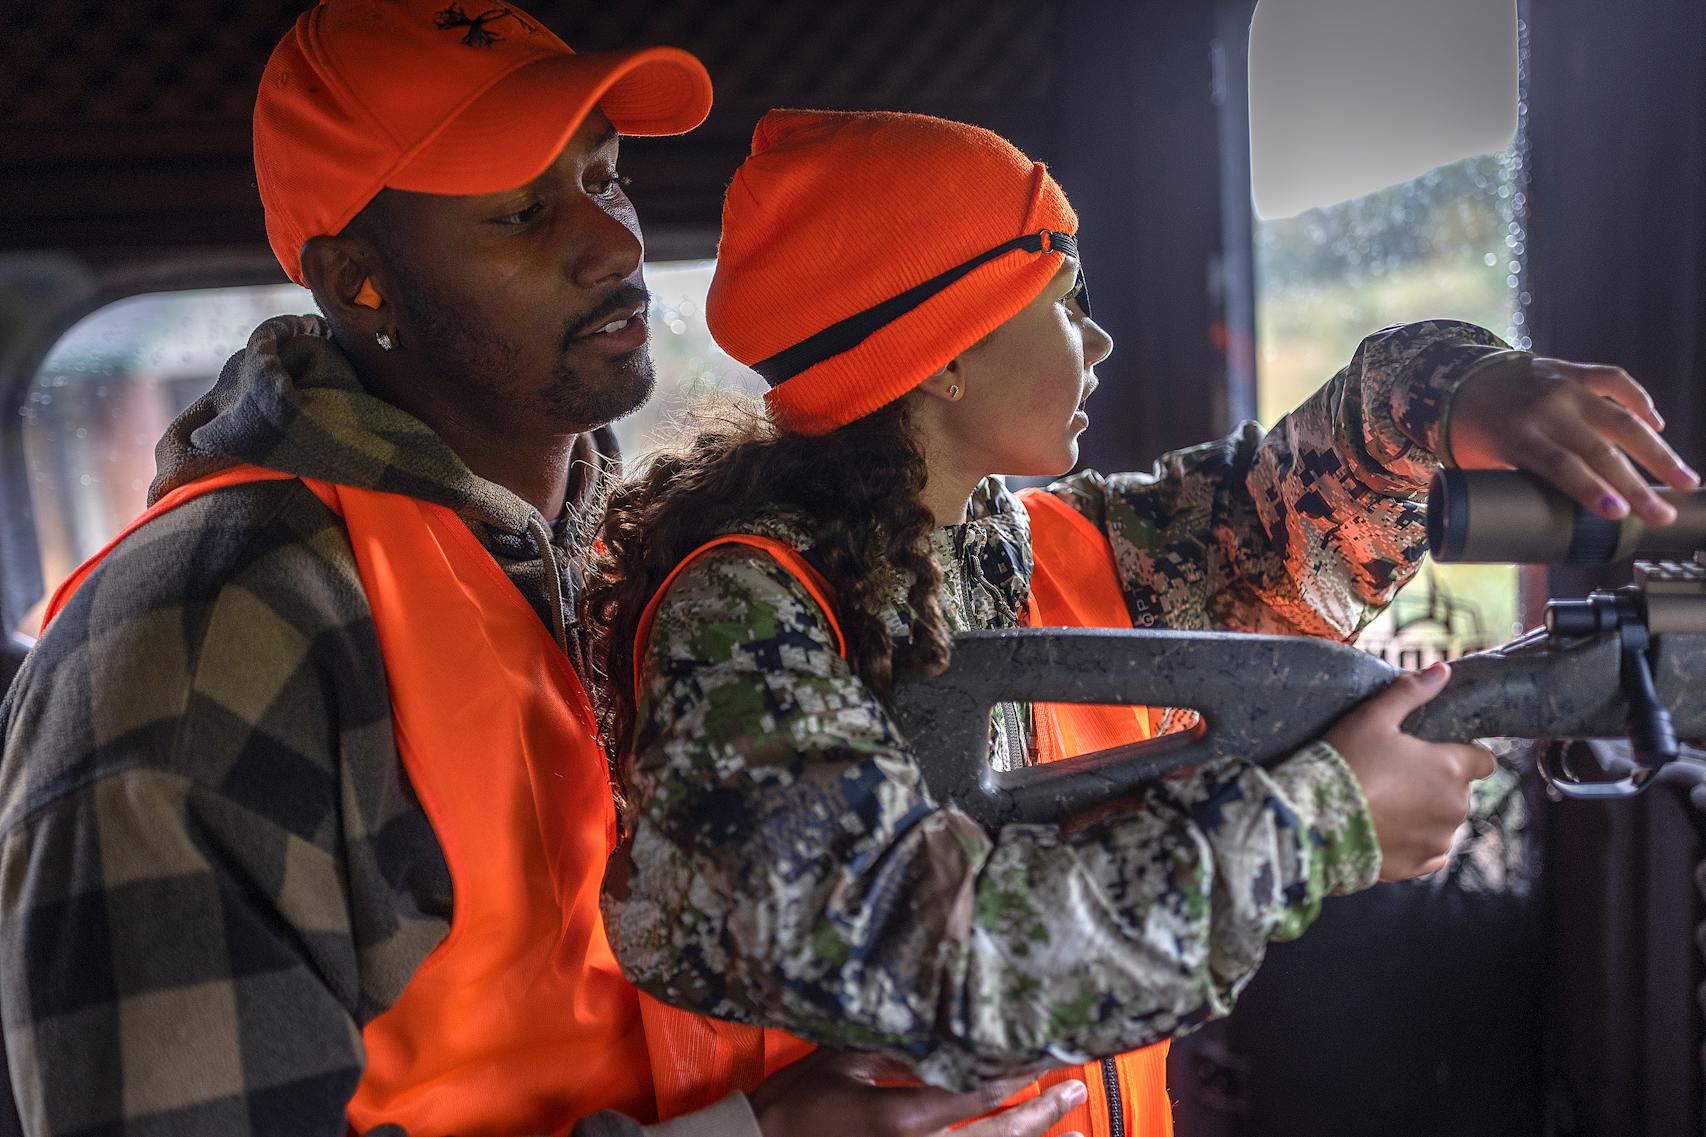 Trae Waynes practiced shooting with his daughter Layla, 7, before her first hunt at their hunting camp Oct. 6.